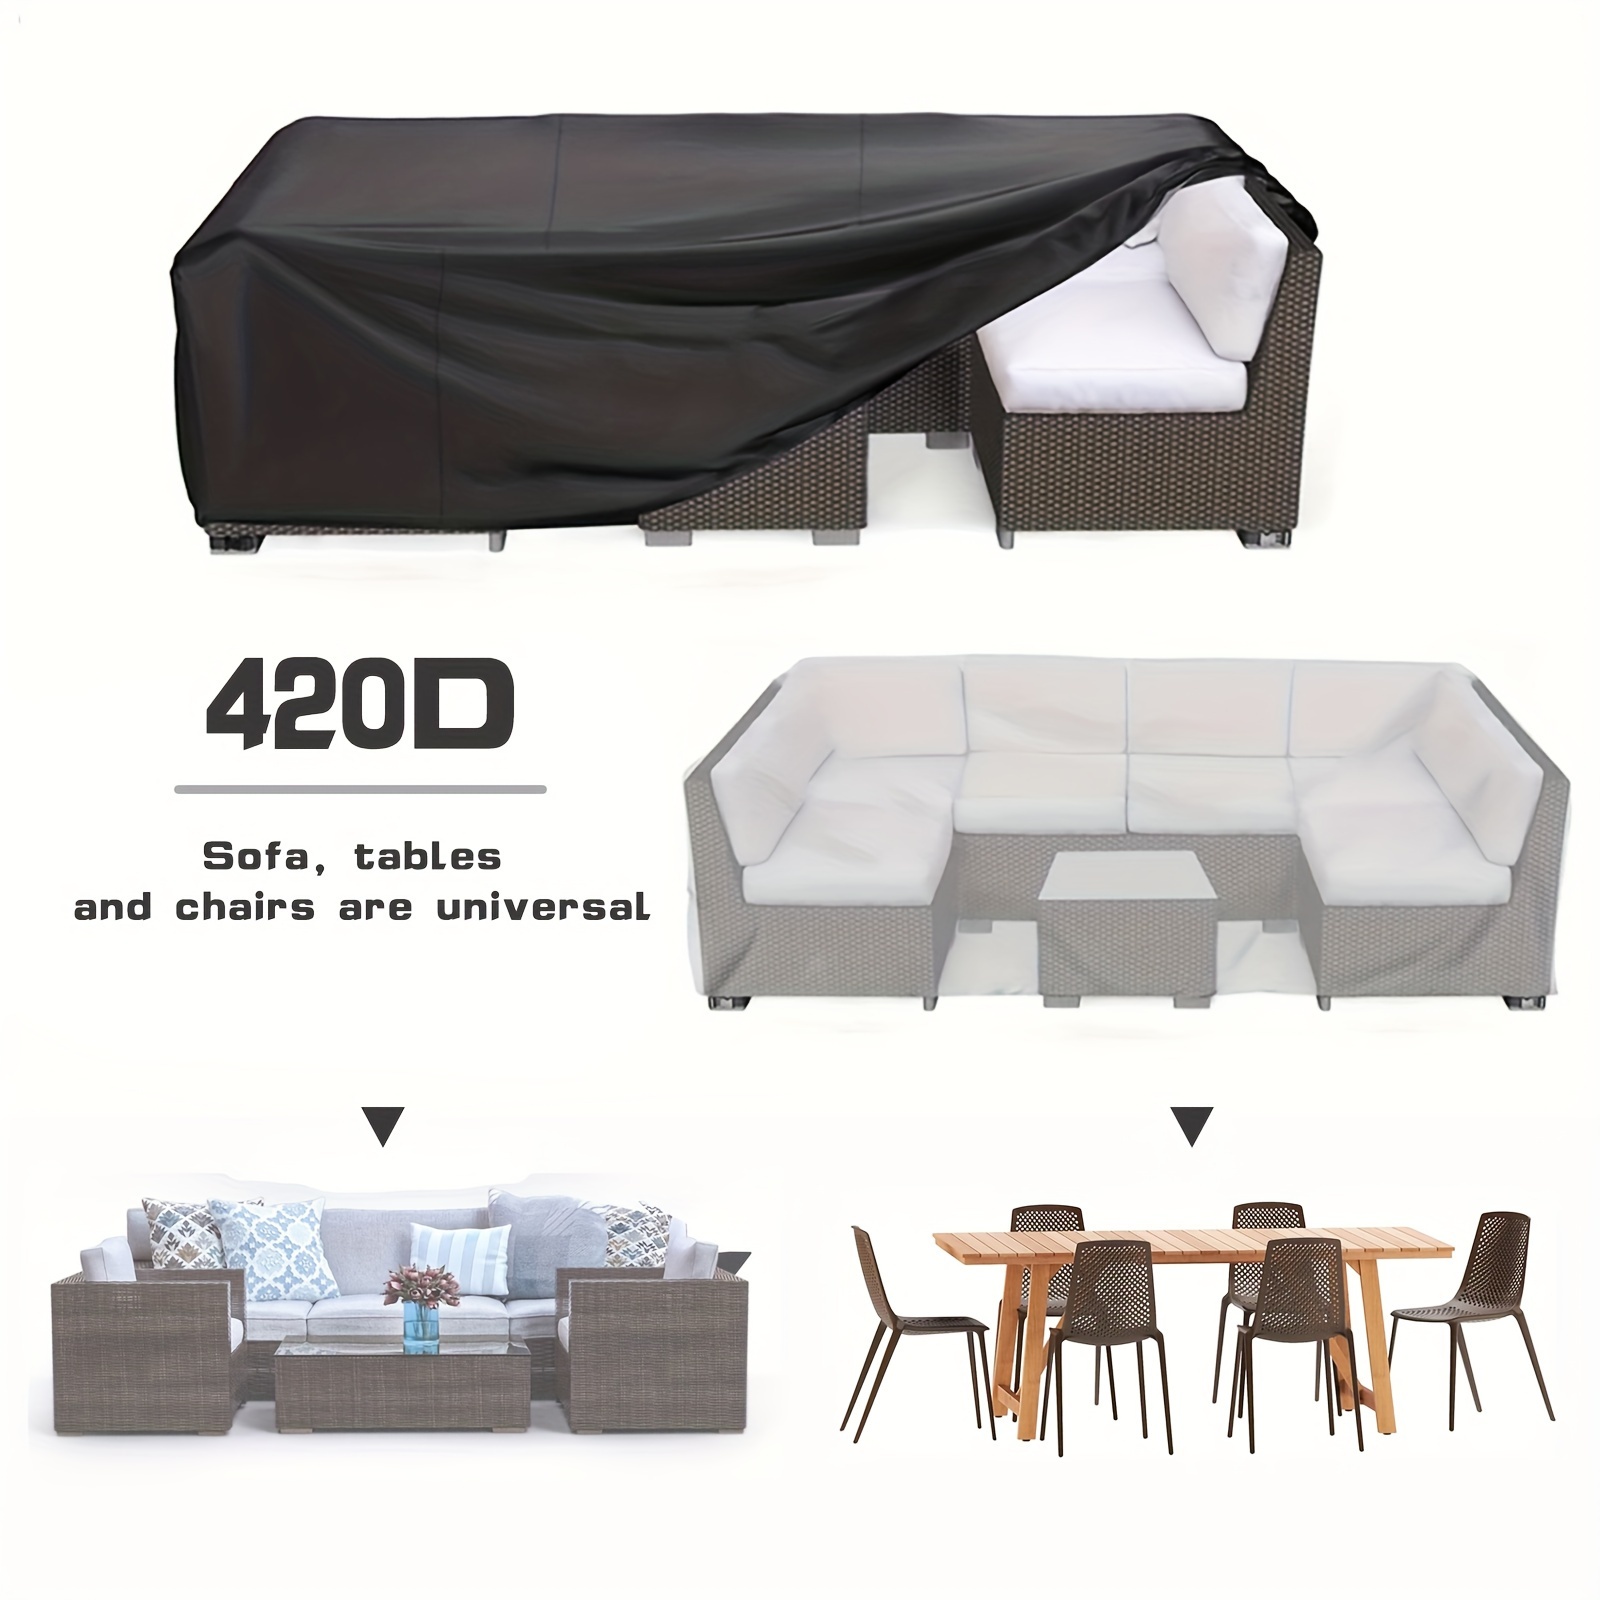 

1 Piece Patio Furniture Covers, Heavy Duty 420d Outdoor Furniture Cover Waterproof, Sectional Sofa Set Covers Table And Chair Set Covers